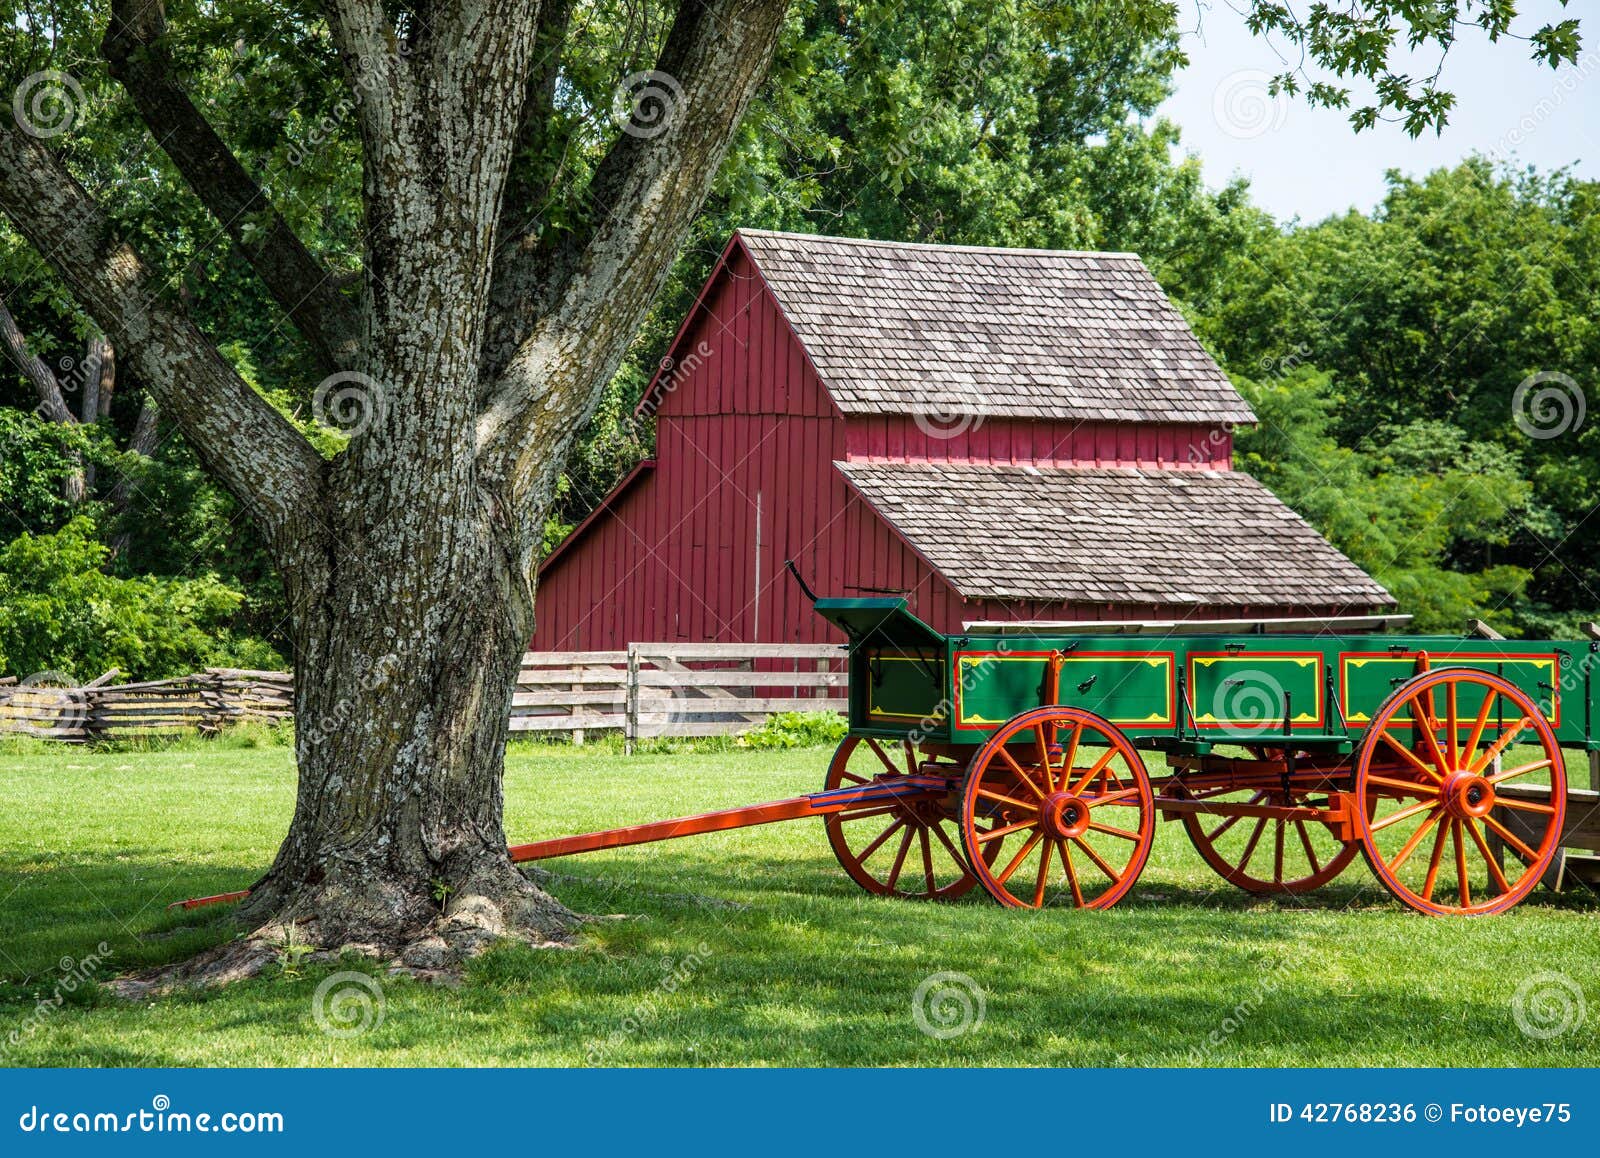  of a Old Red Barn on a farm in Missouri Town with old wooden fence